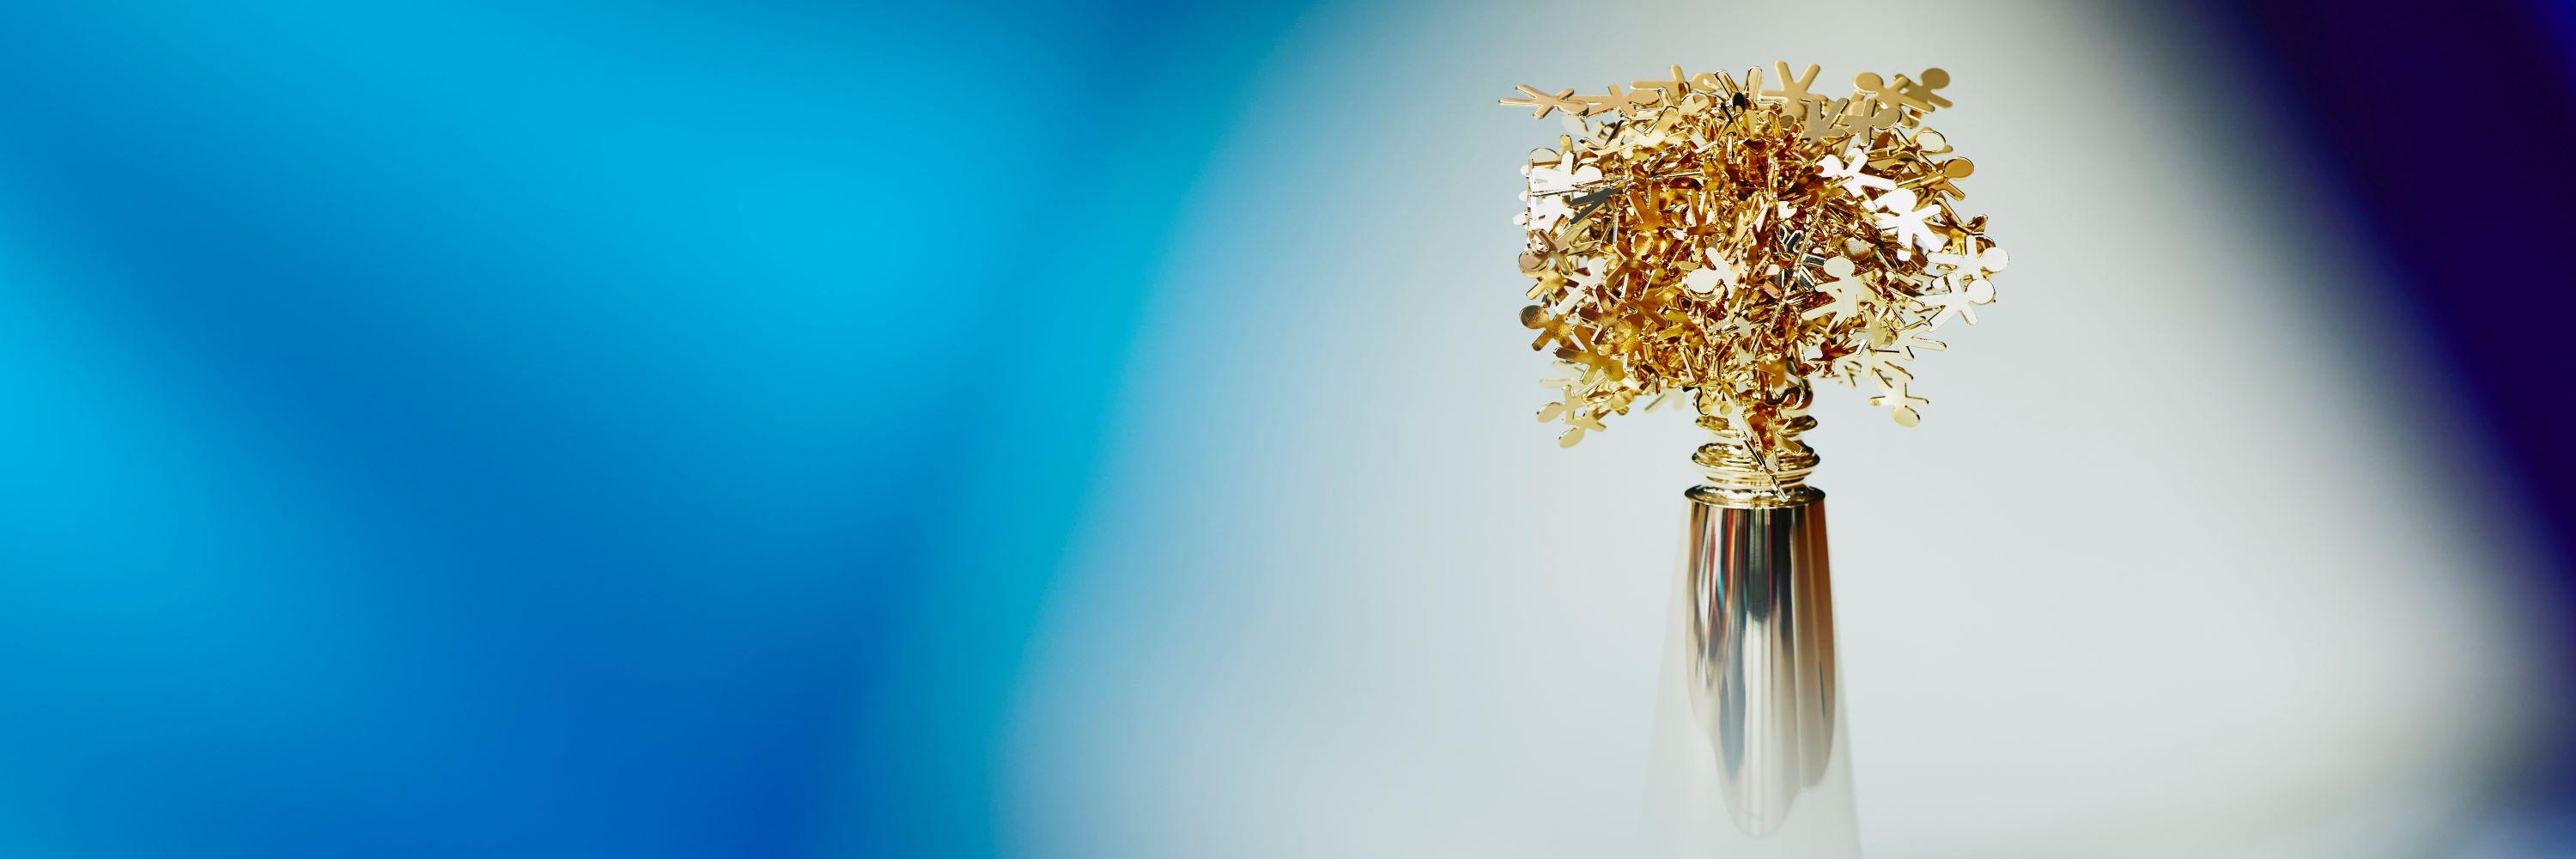 an image of gold flower decorations in a vase